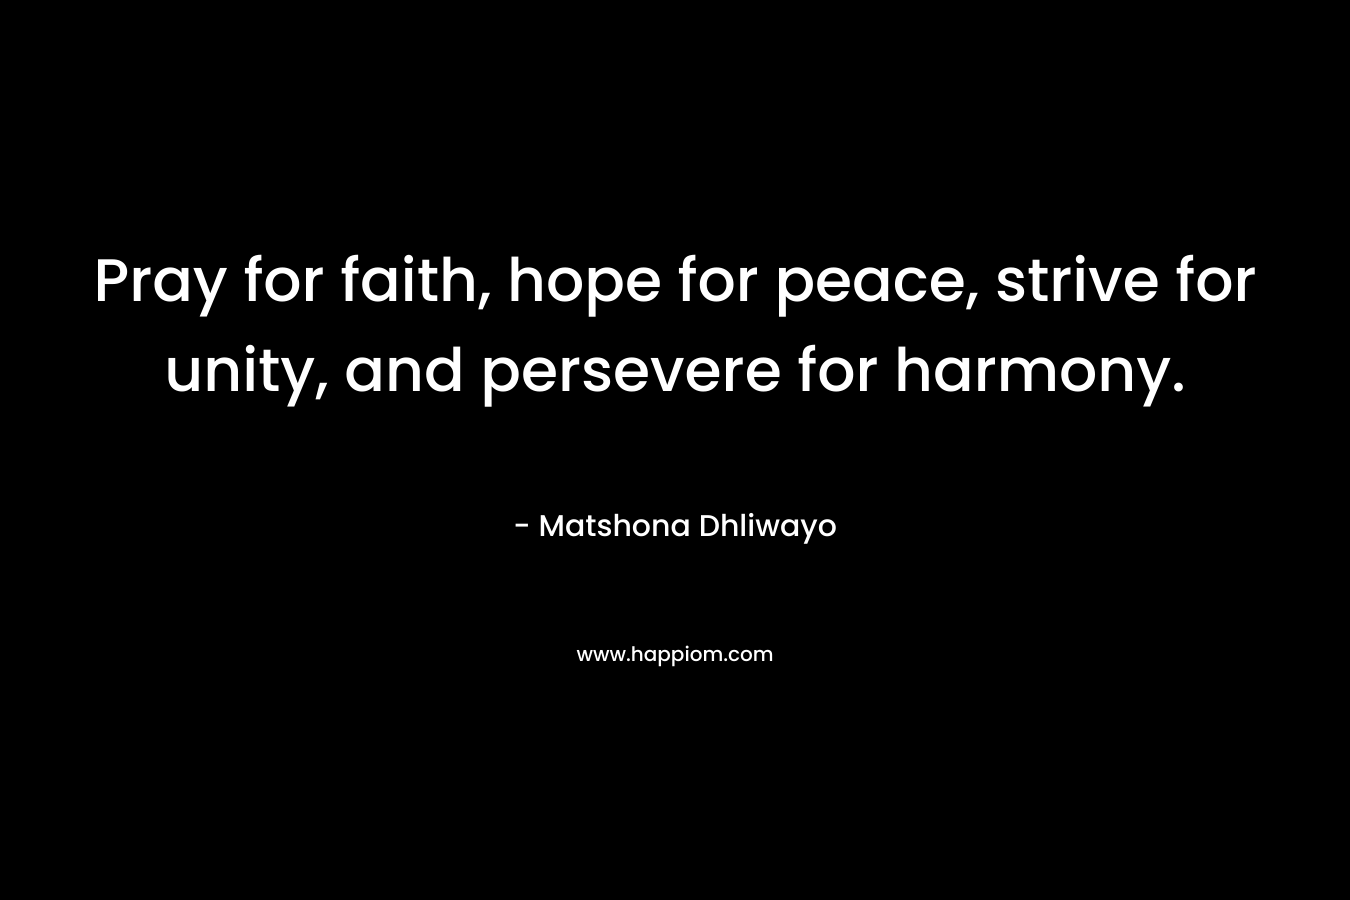 Pray for faith, hope for peace, strive for unity, and persevere for harmony.